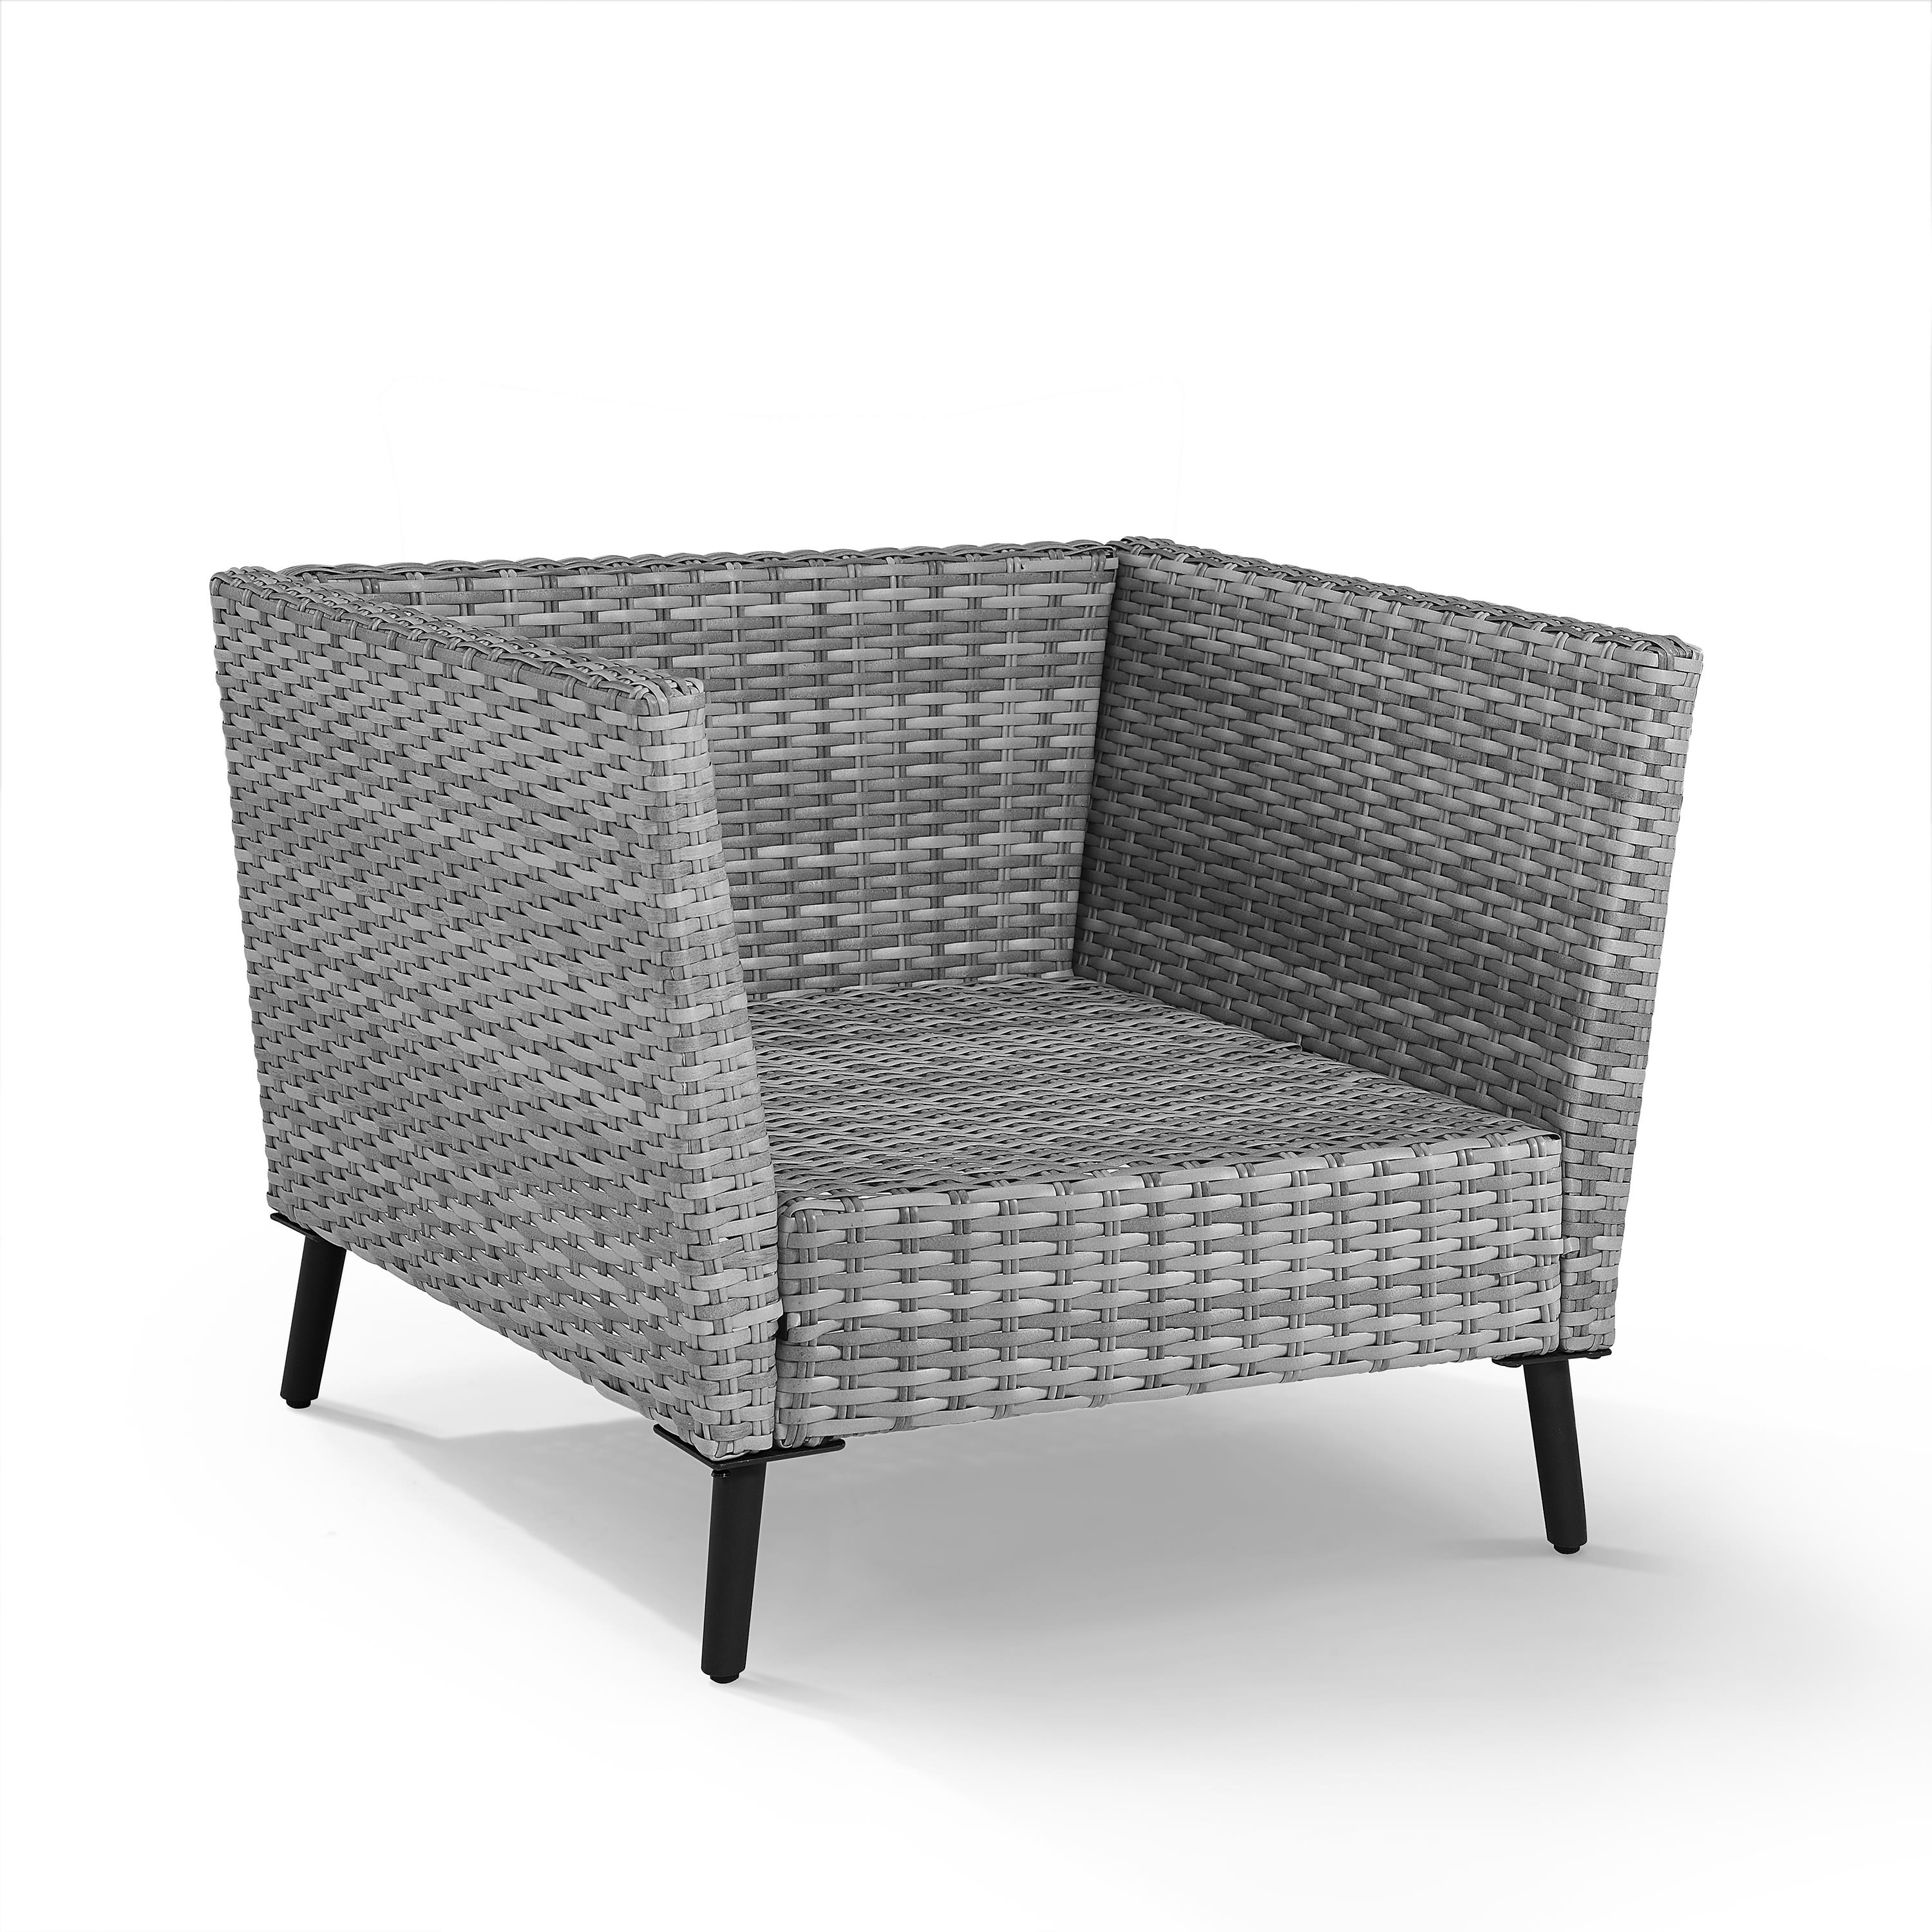 Crosley Richland Wicker Patio Arm Chair in Gray (Set of 2) - image 5 of 10